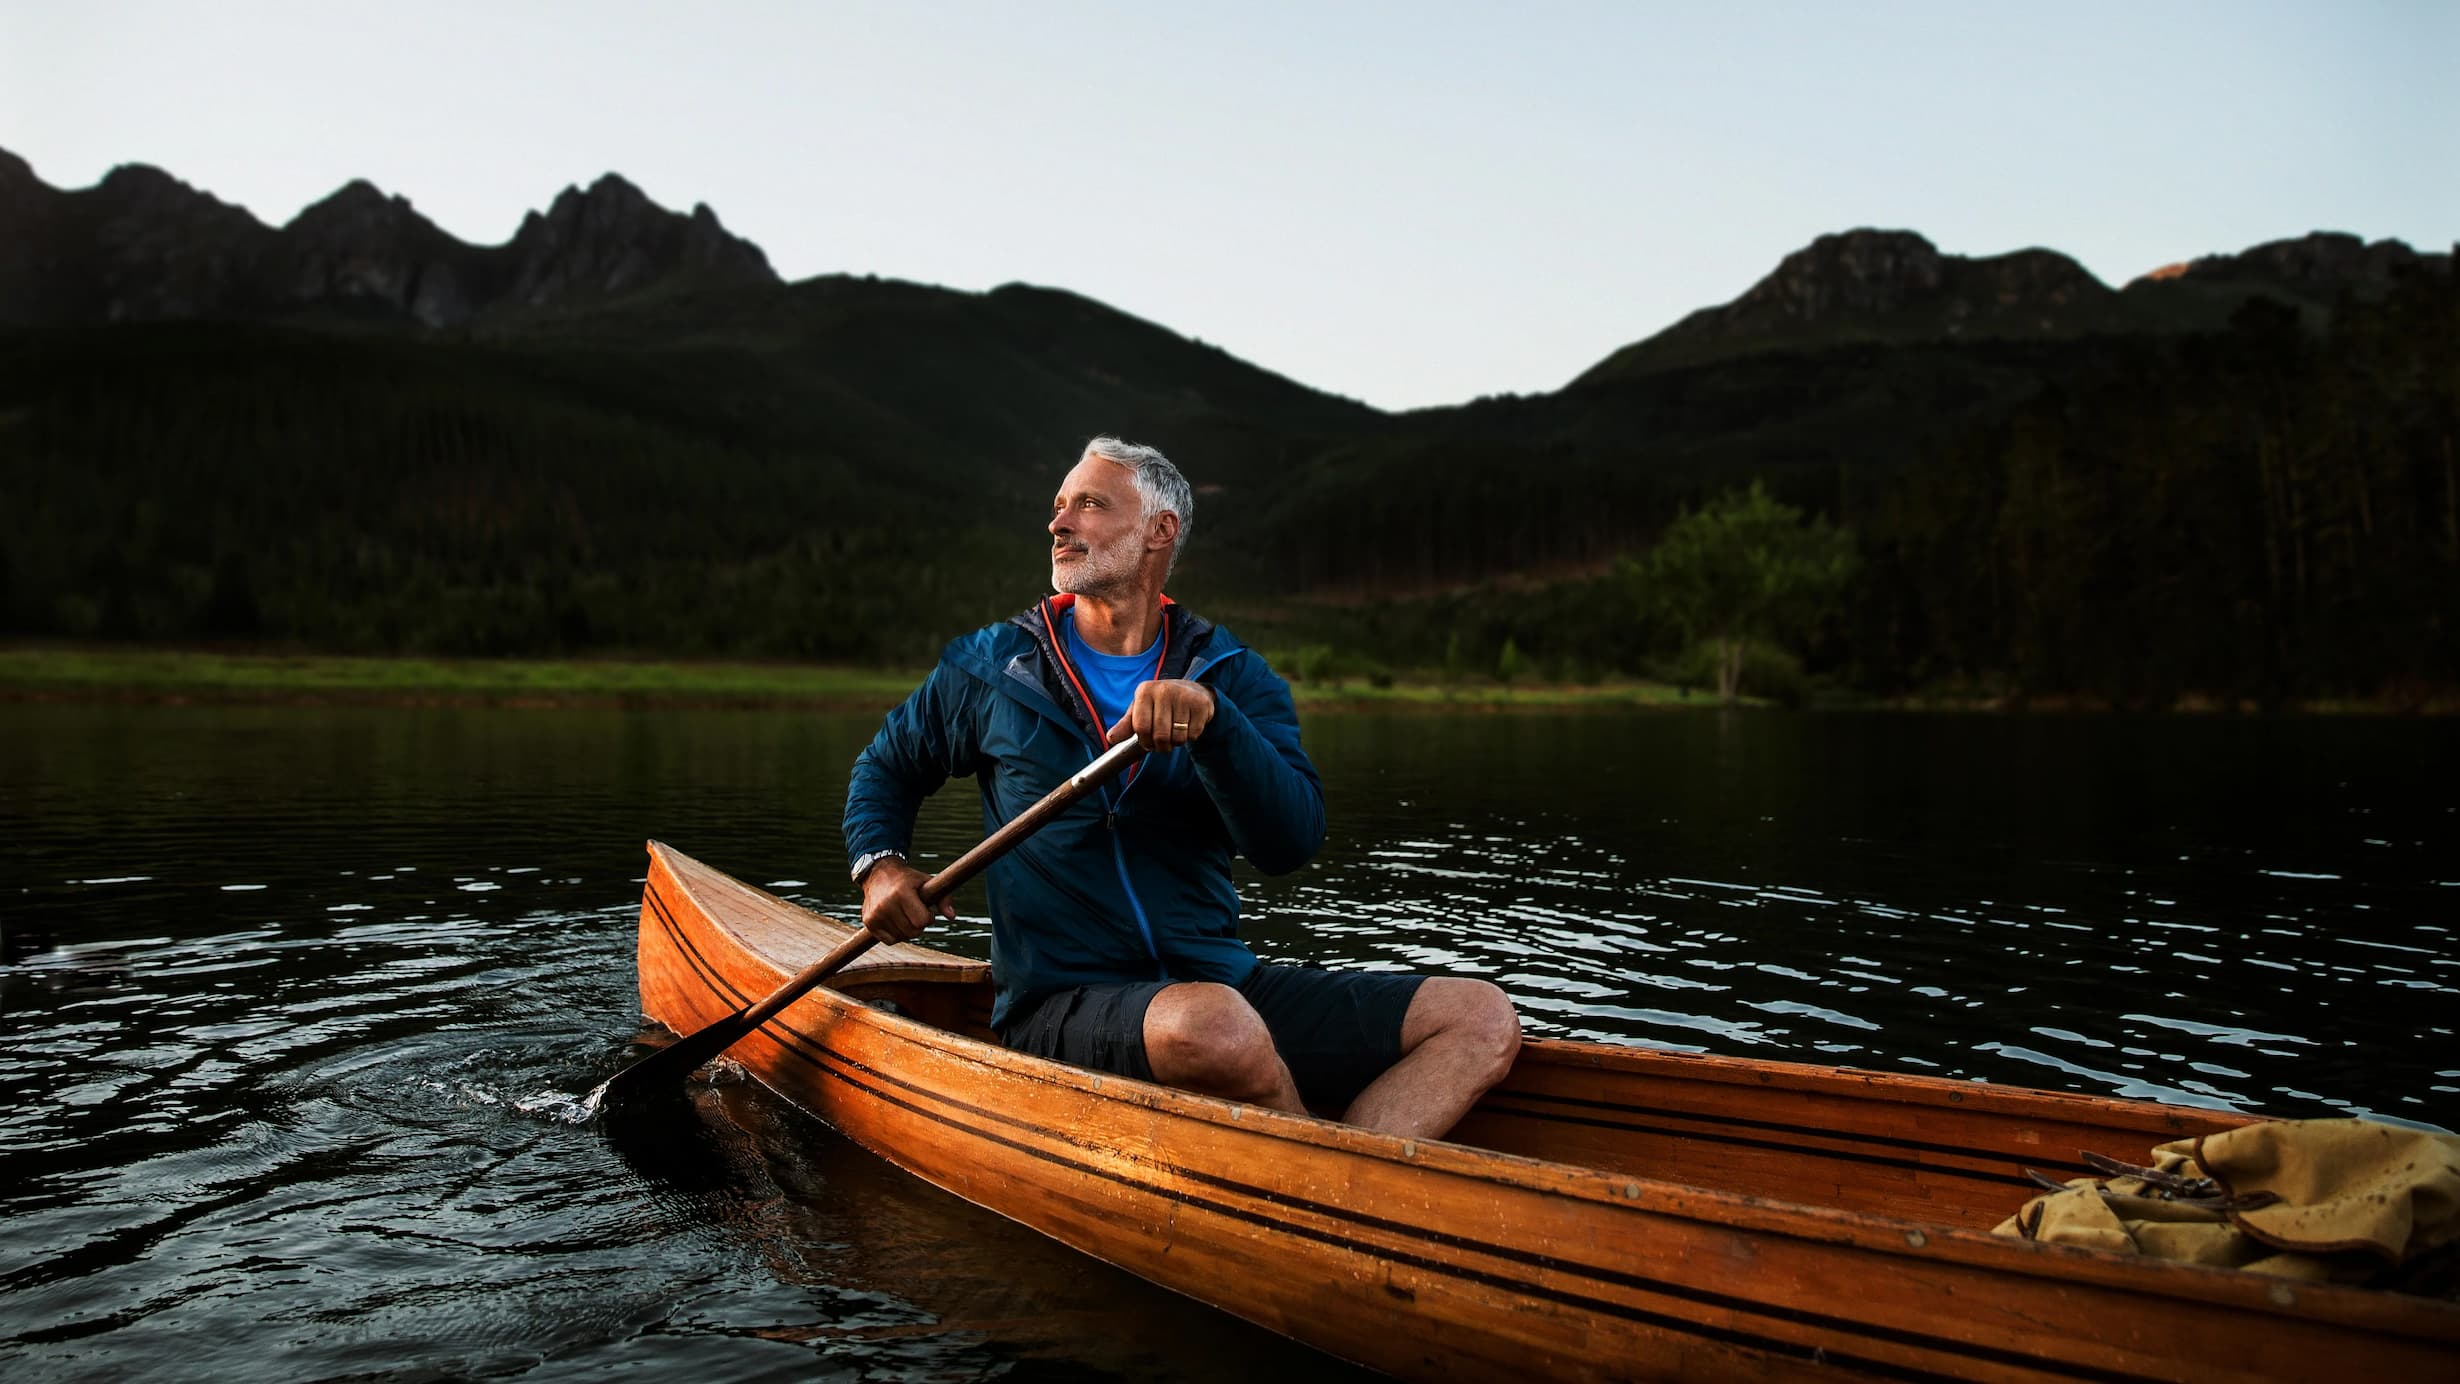 Man canoeing in a river using hearing aids